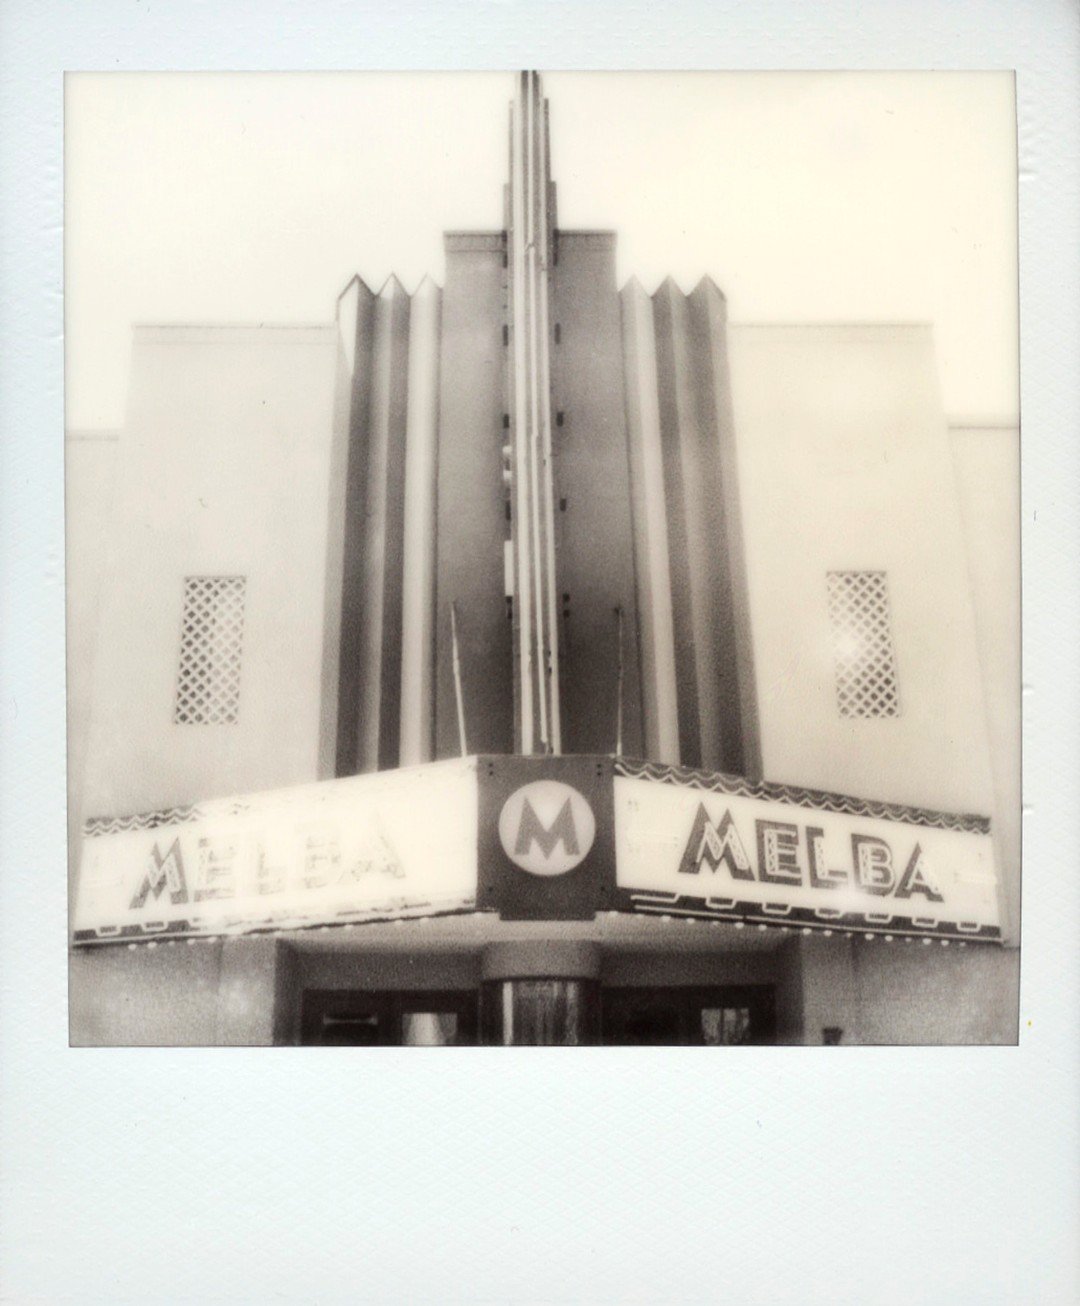 The Melba Theater in Batesville AR is in their old downtown. This theater is still active, and they show older films instead of new stuff. The week we were there they were showing &quot;E.T. - The Extra Terrestrial&quot;. It's a beautiful building wi